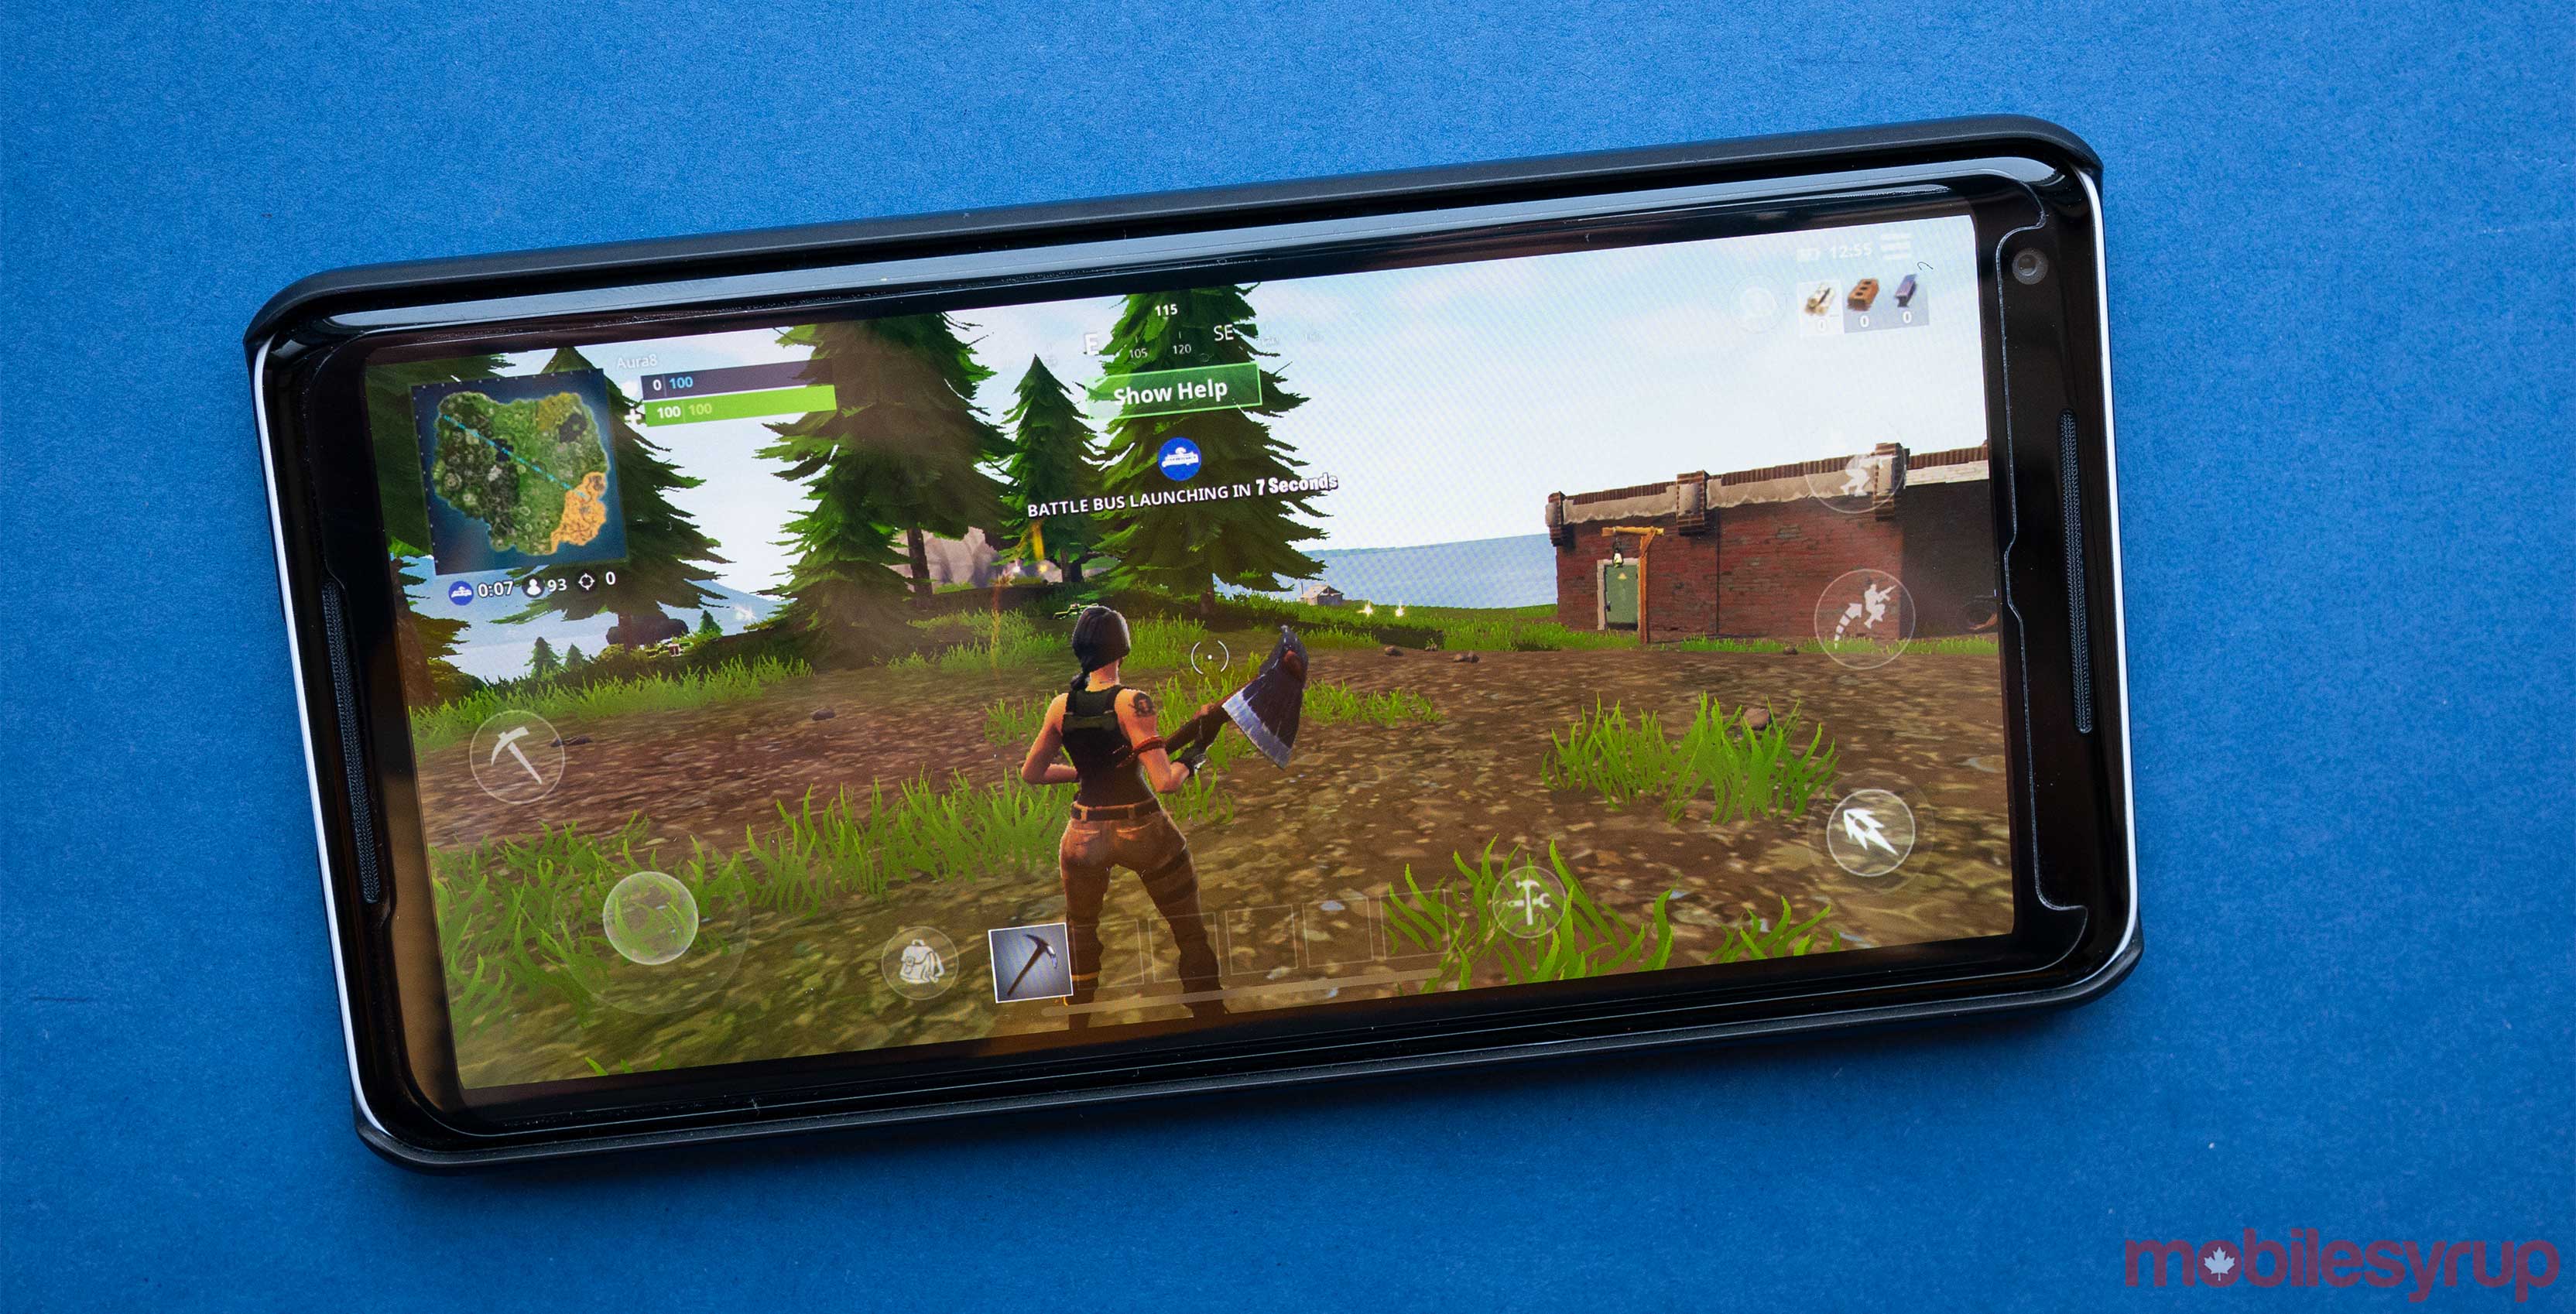 Leaked Fortnite APK hints game could be coming to Samsung ... - 3328 x 1698 jpeg 592kB